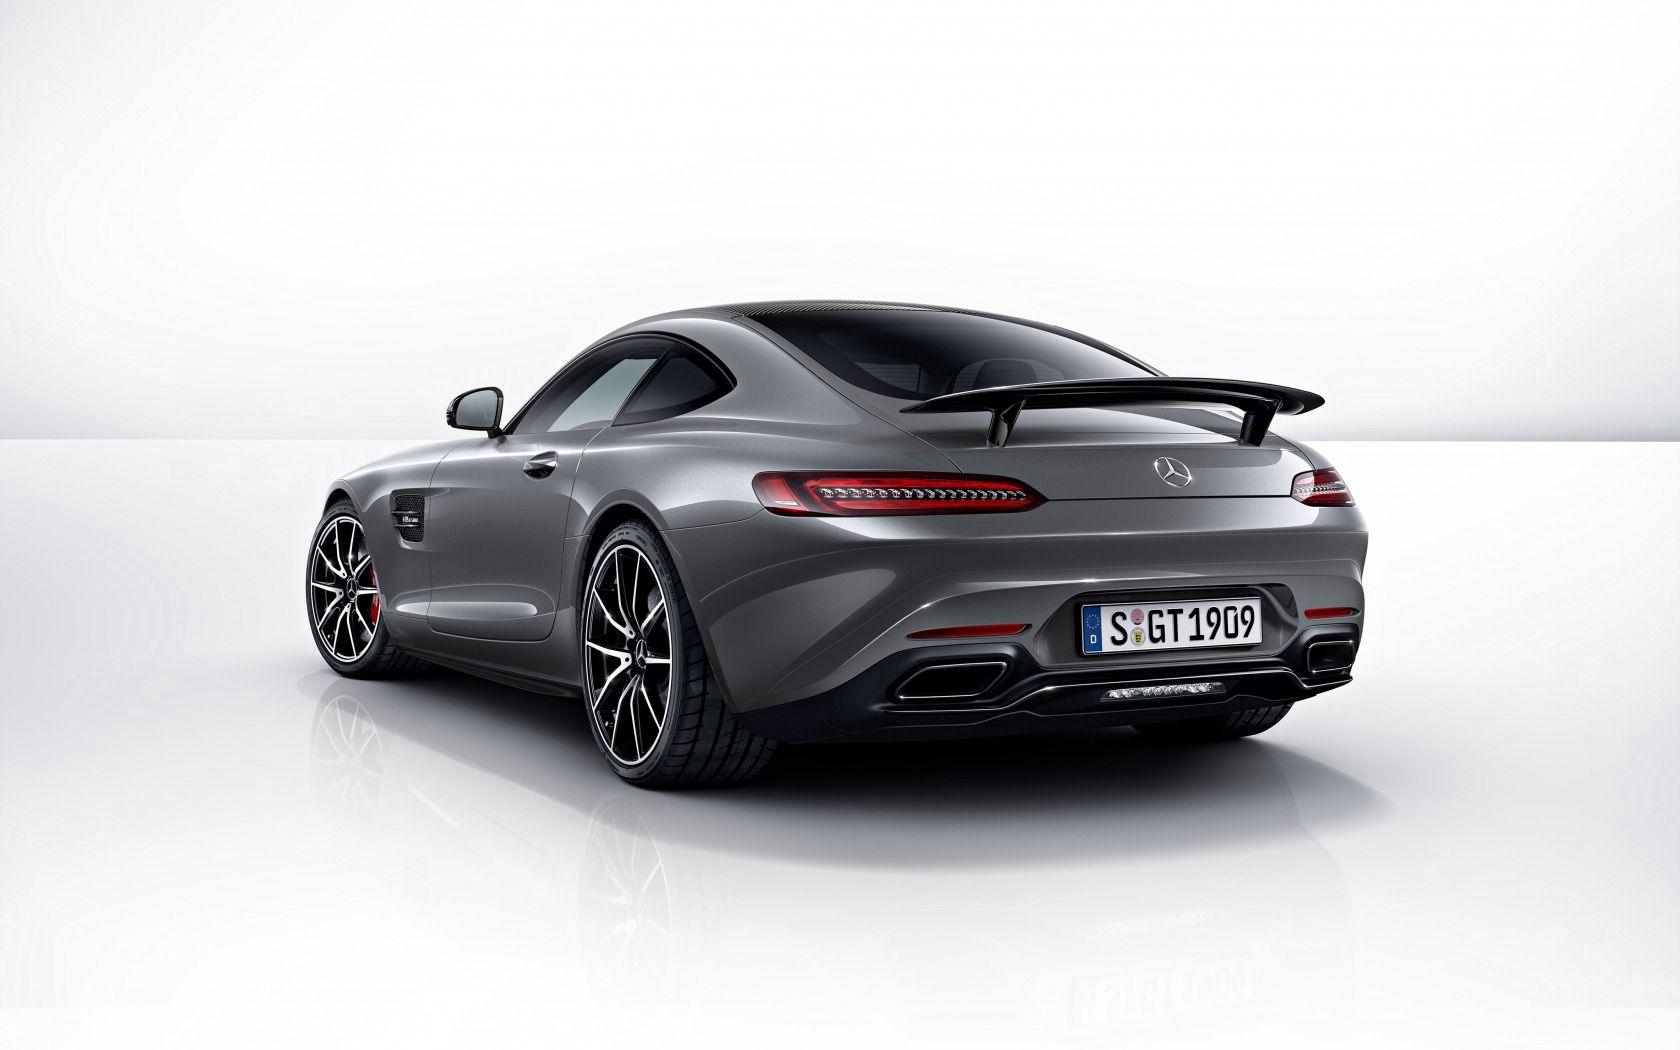 cars, grey, 2014, rear view, back view, amg, mercedes, gt, edition 1 2160p